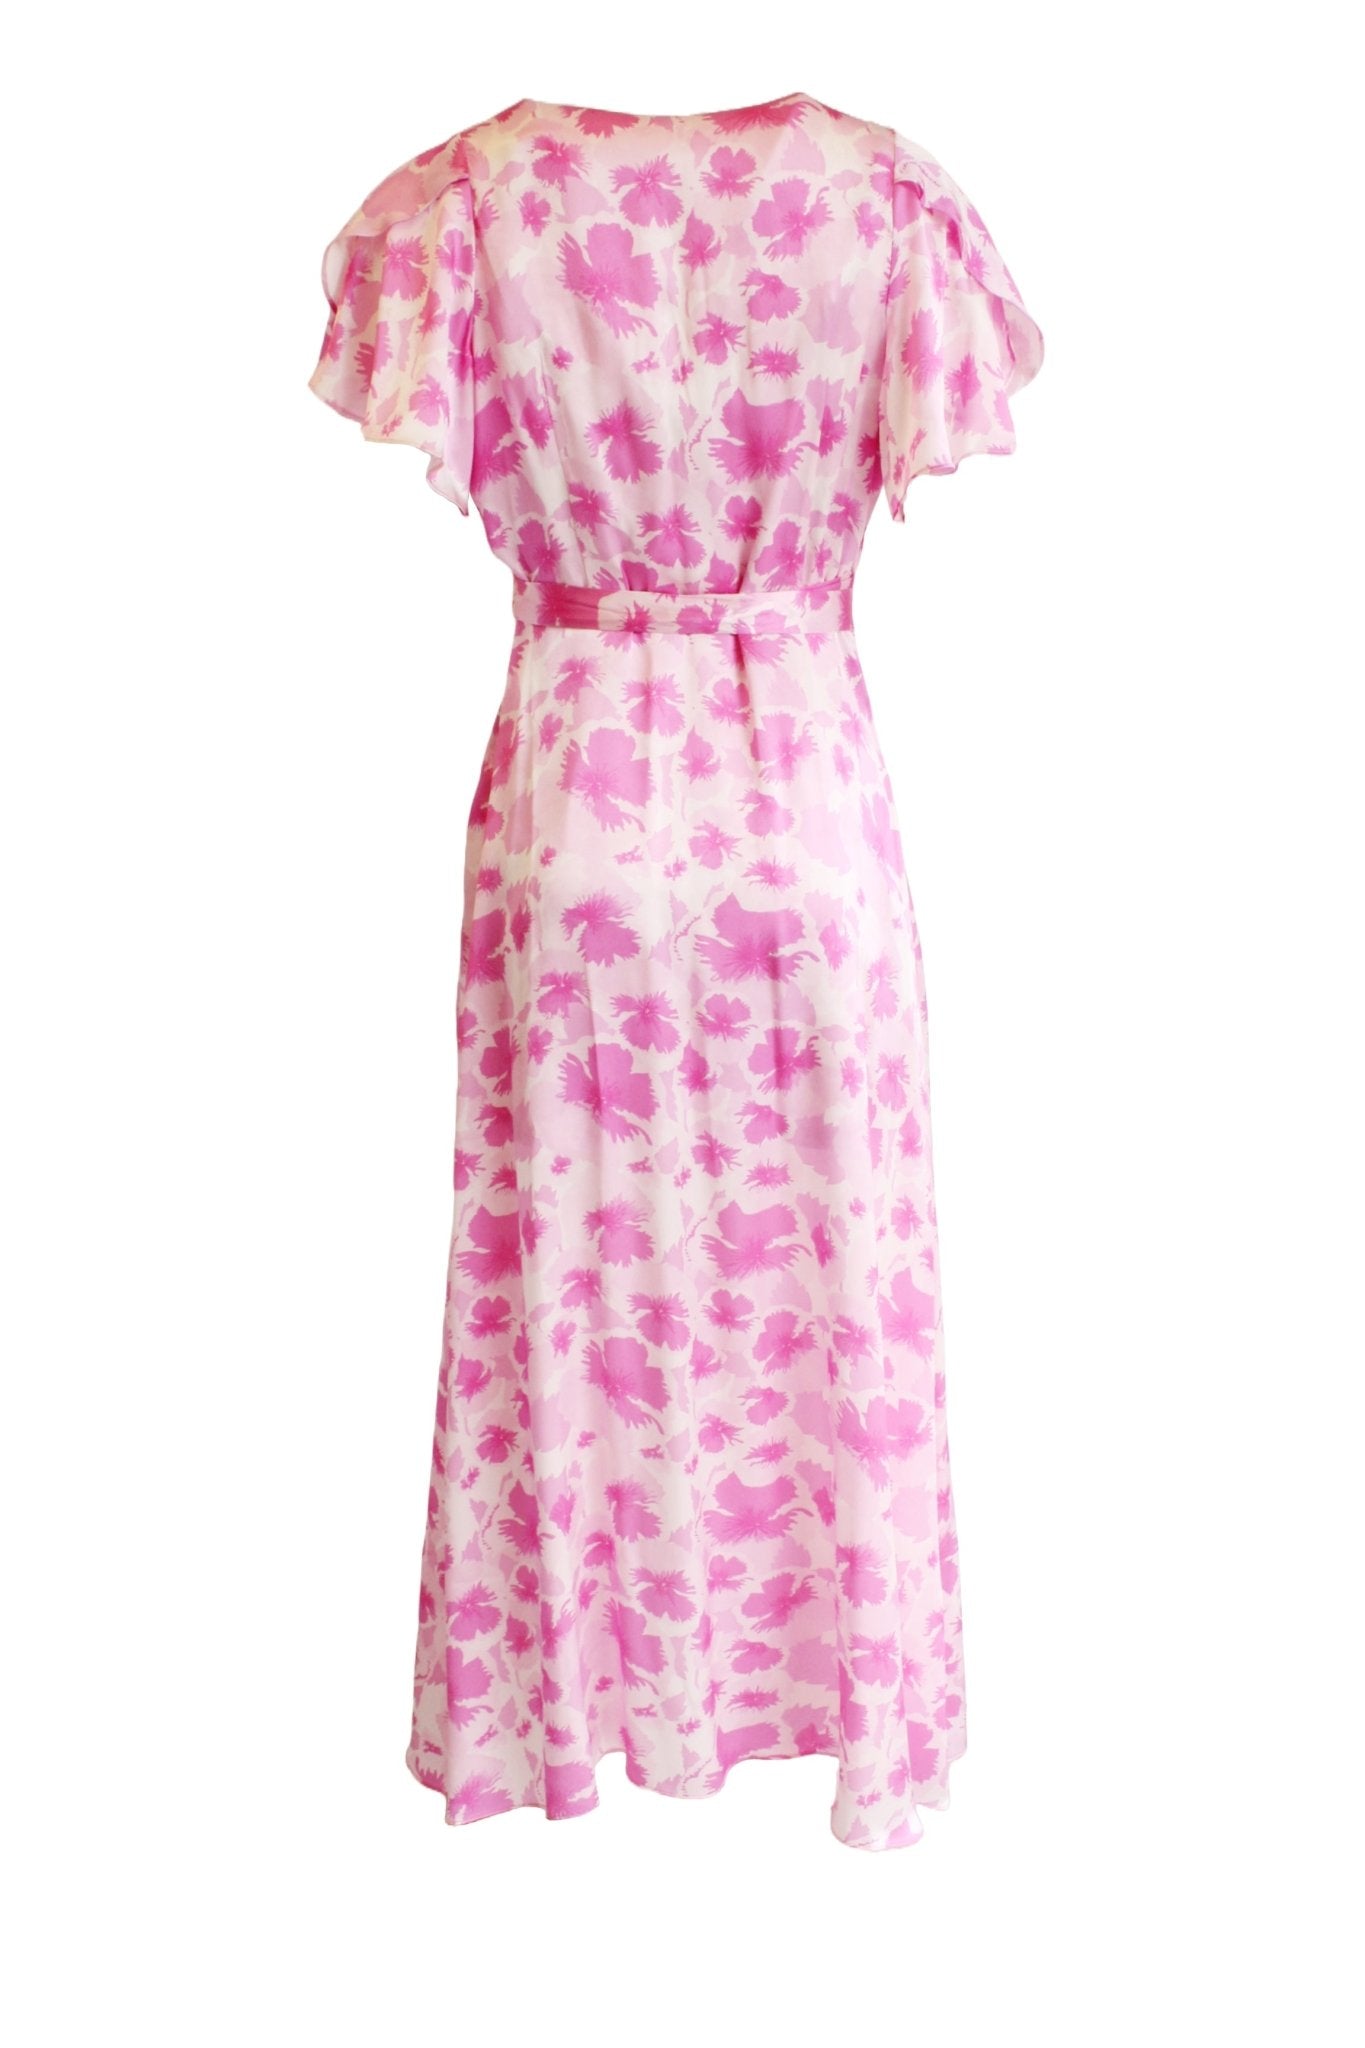 LeDoré Stacey Dress - Viola Floral Pink/White - Sweepstake Winners™